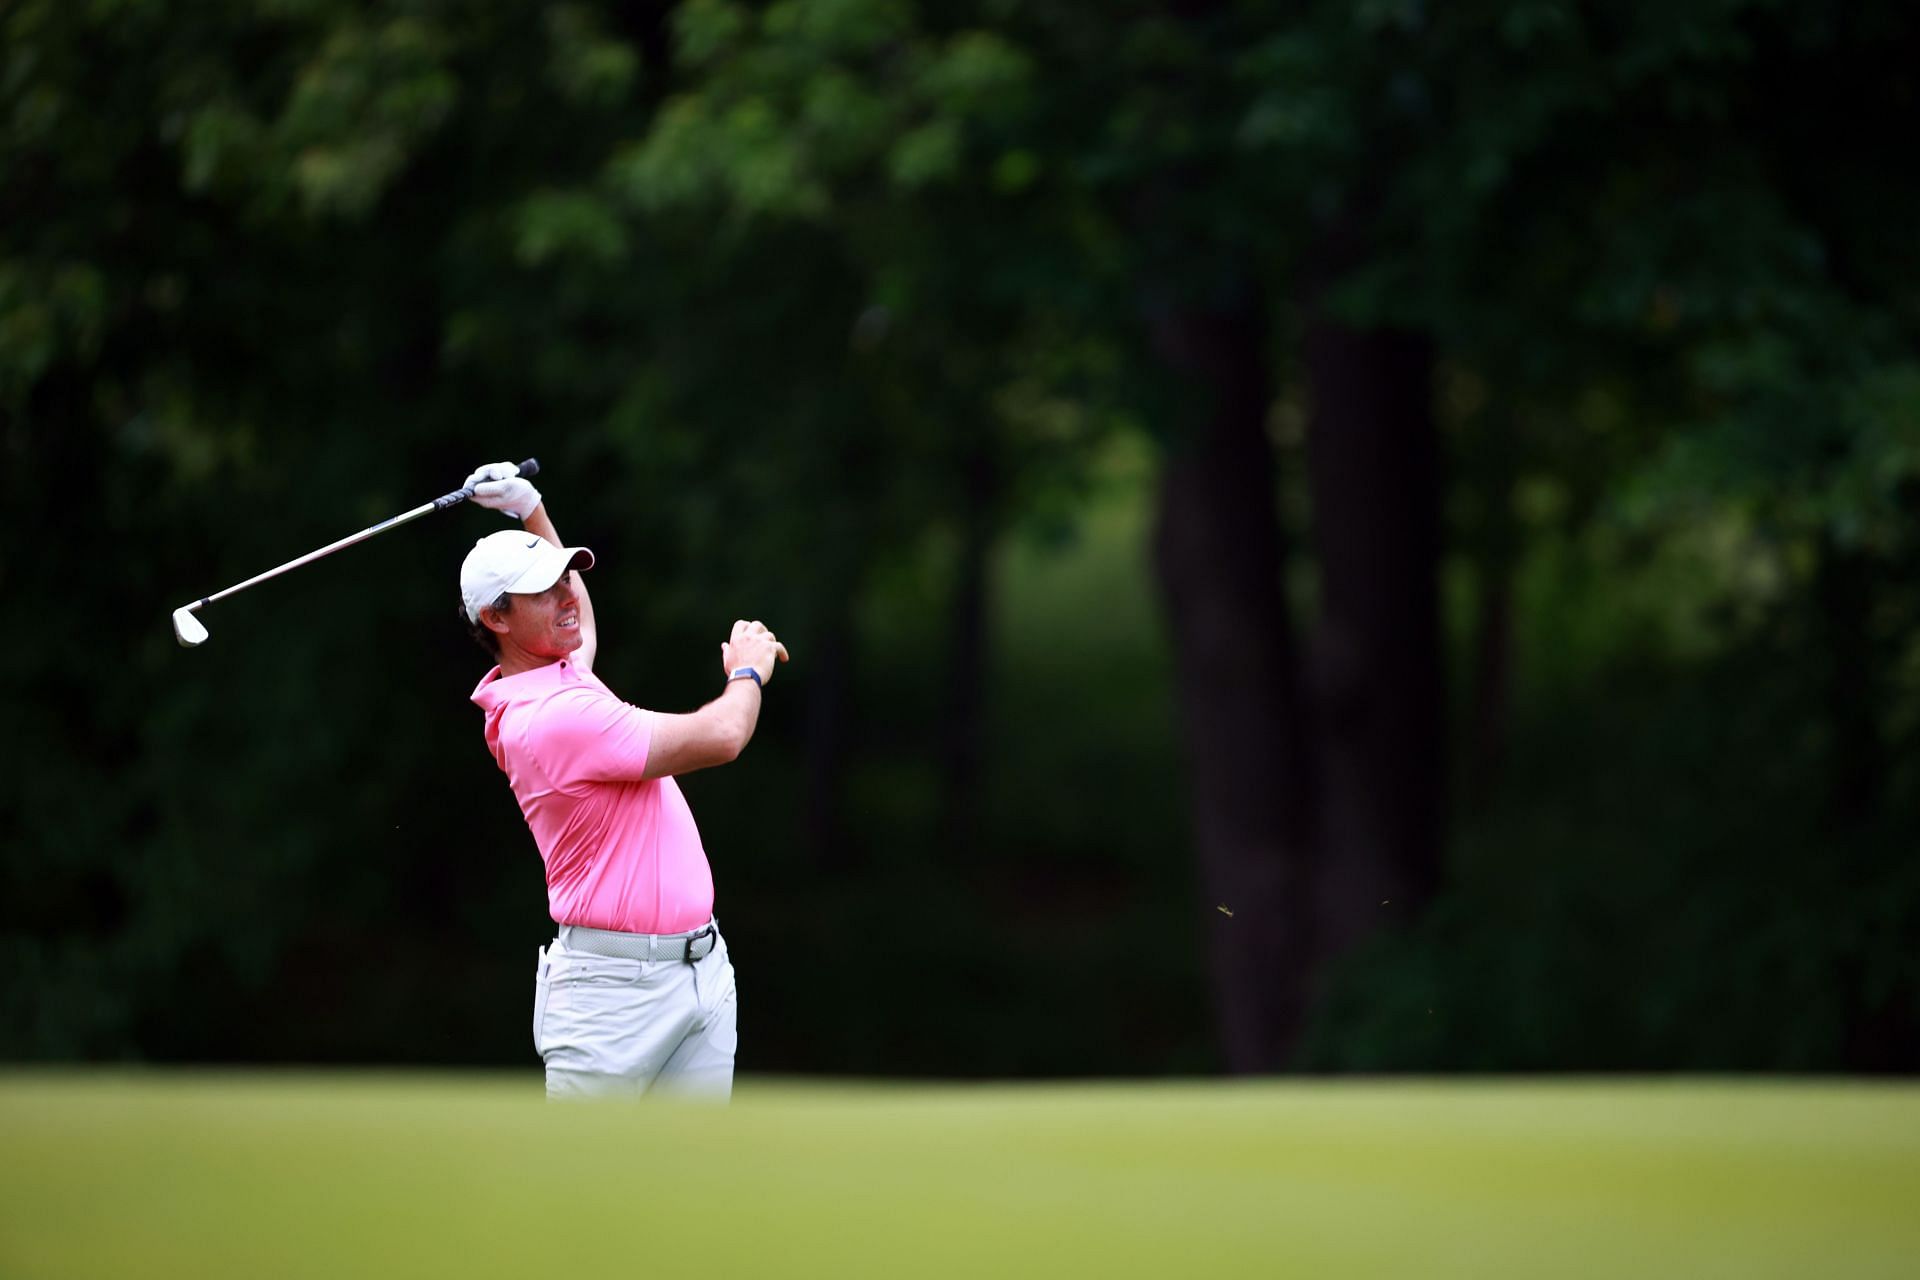 Rory McIlroy at the 2023 RBC Canadian Open (Image via Getty).